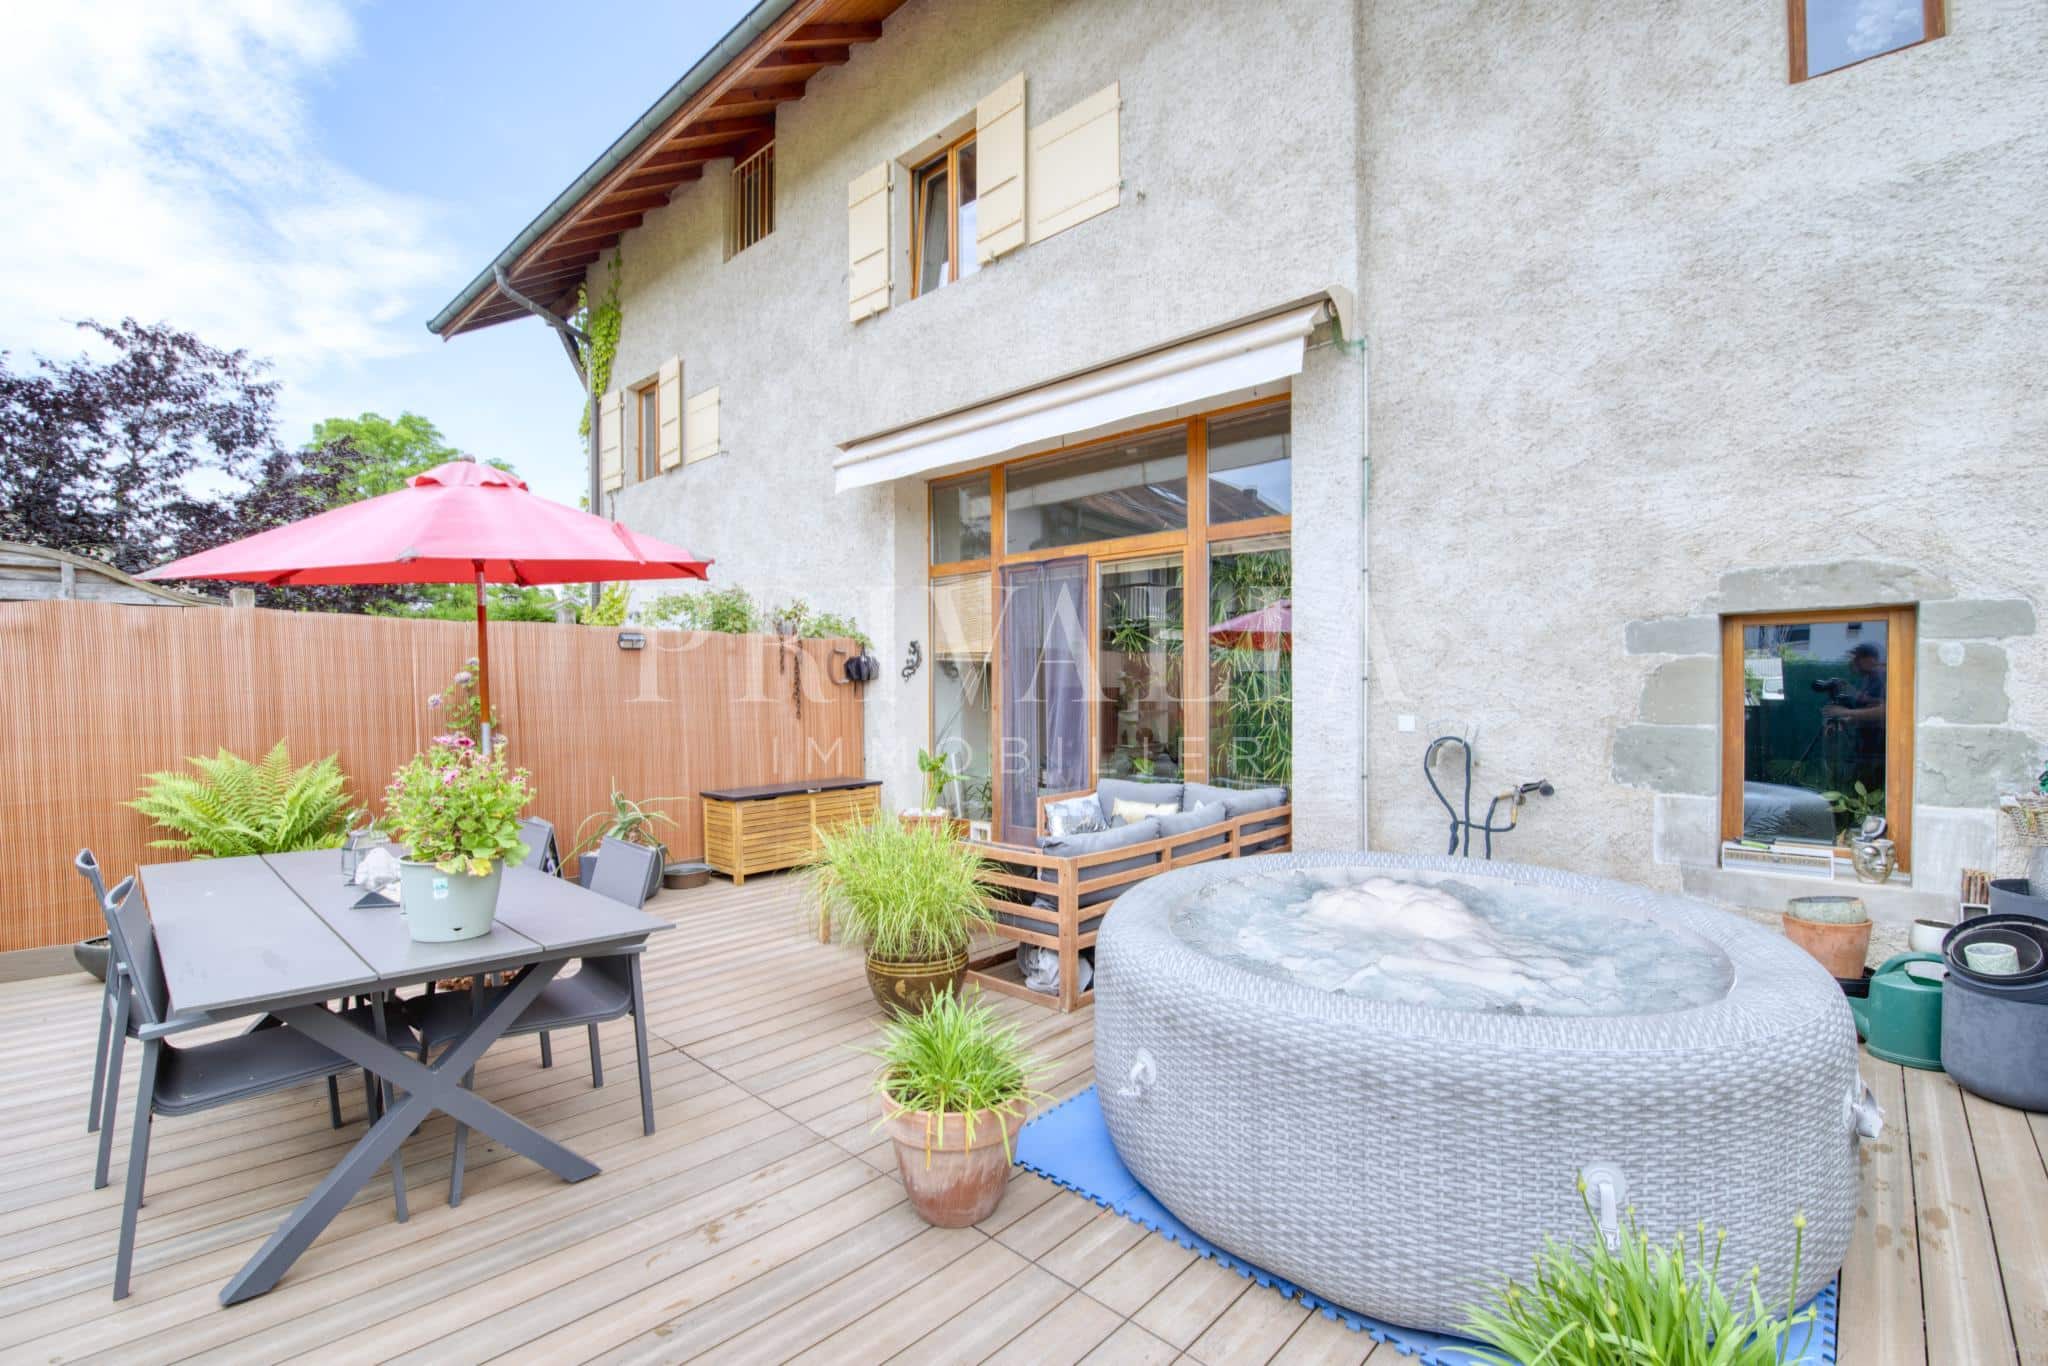 PrivaliaExclusive: Charming village house in the heart of Chancy